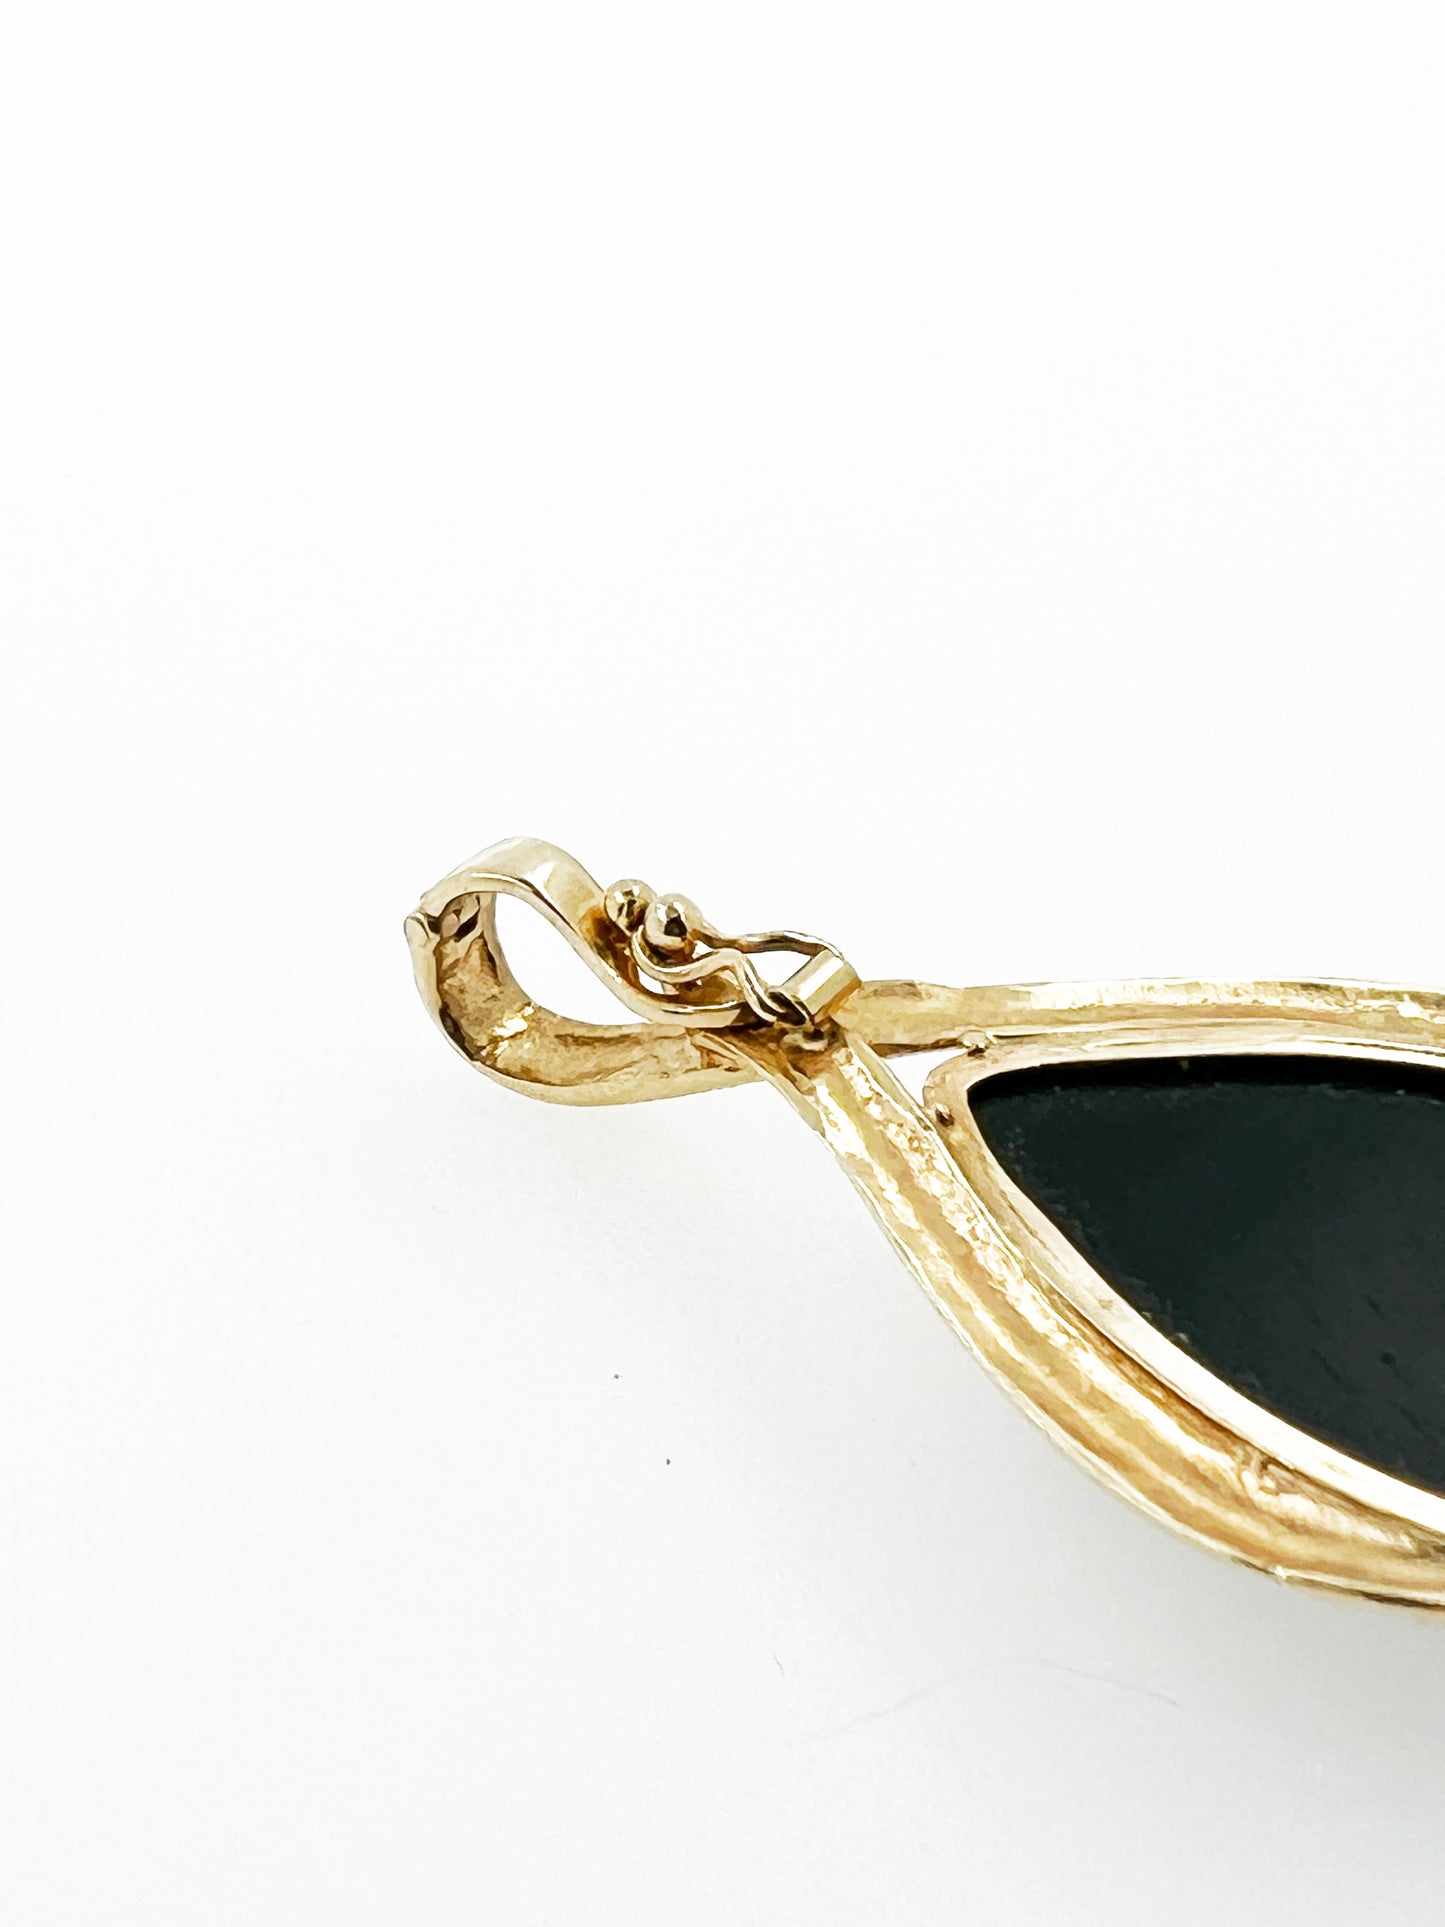 Pear Shaped Onyx Cabochon Pendant in 14k Yellow Gold